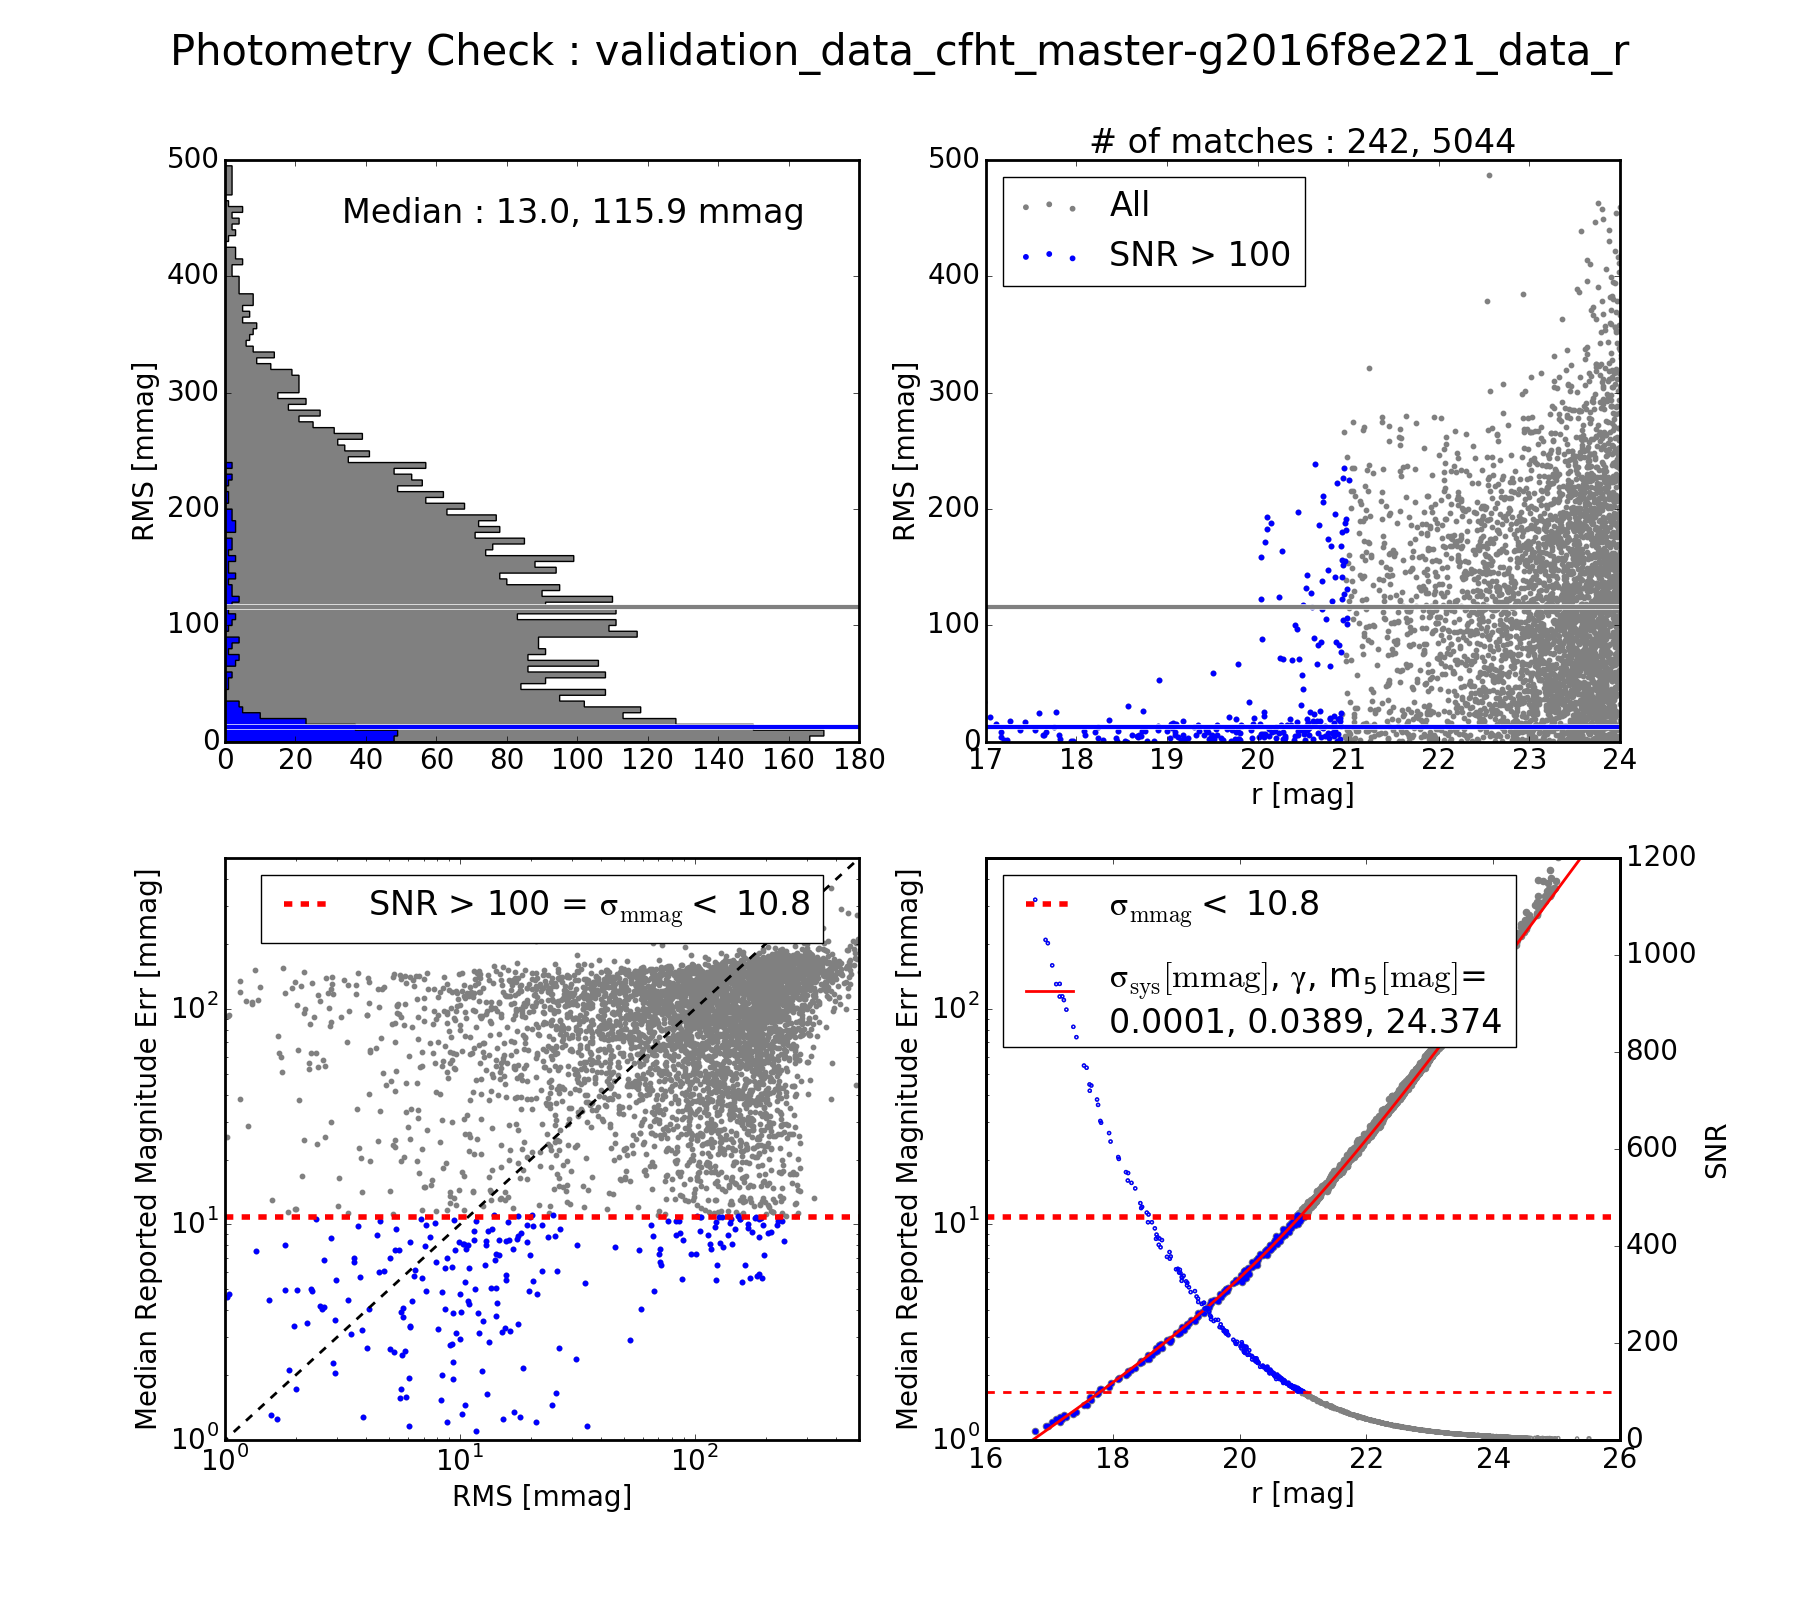 CFHT Photometry RMS